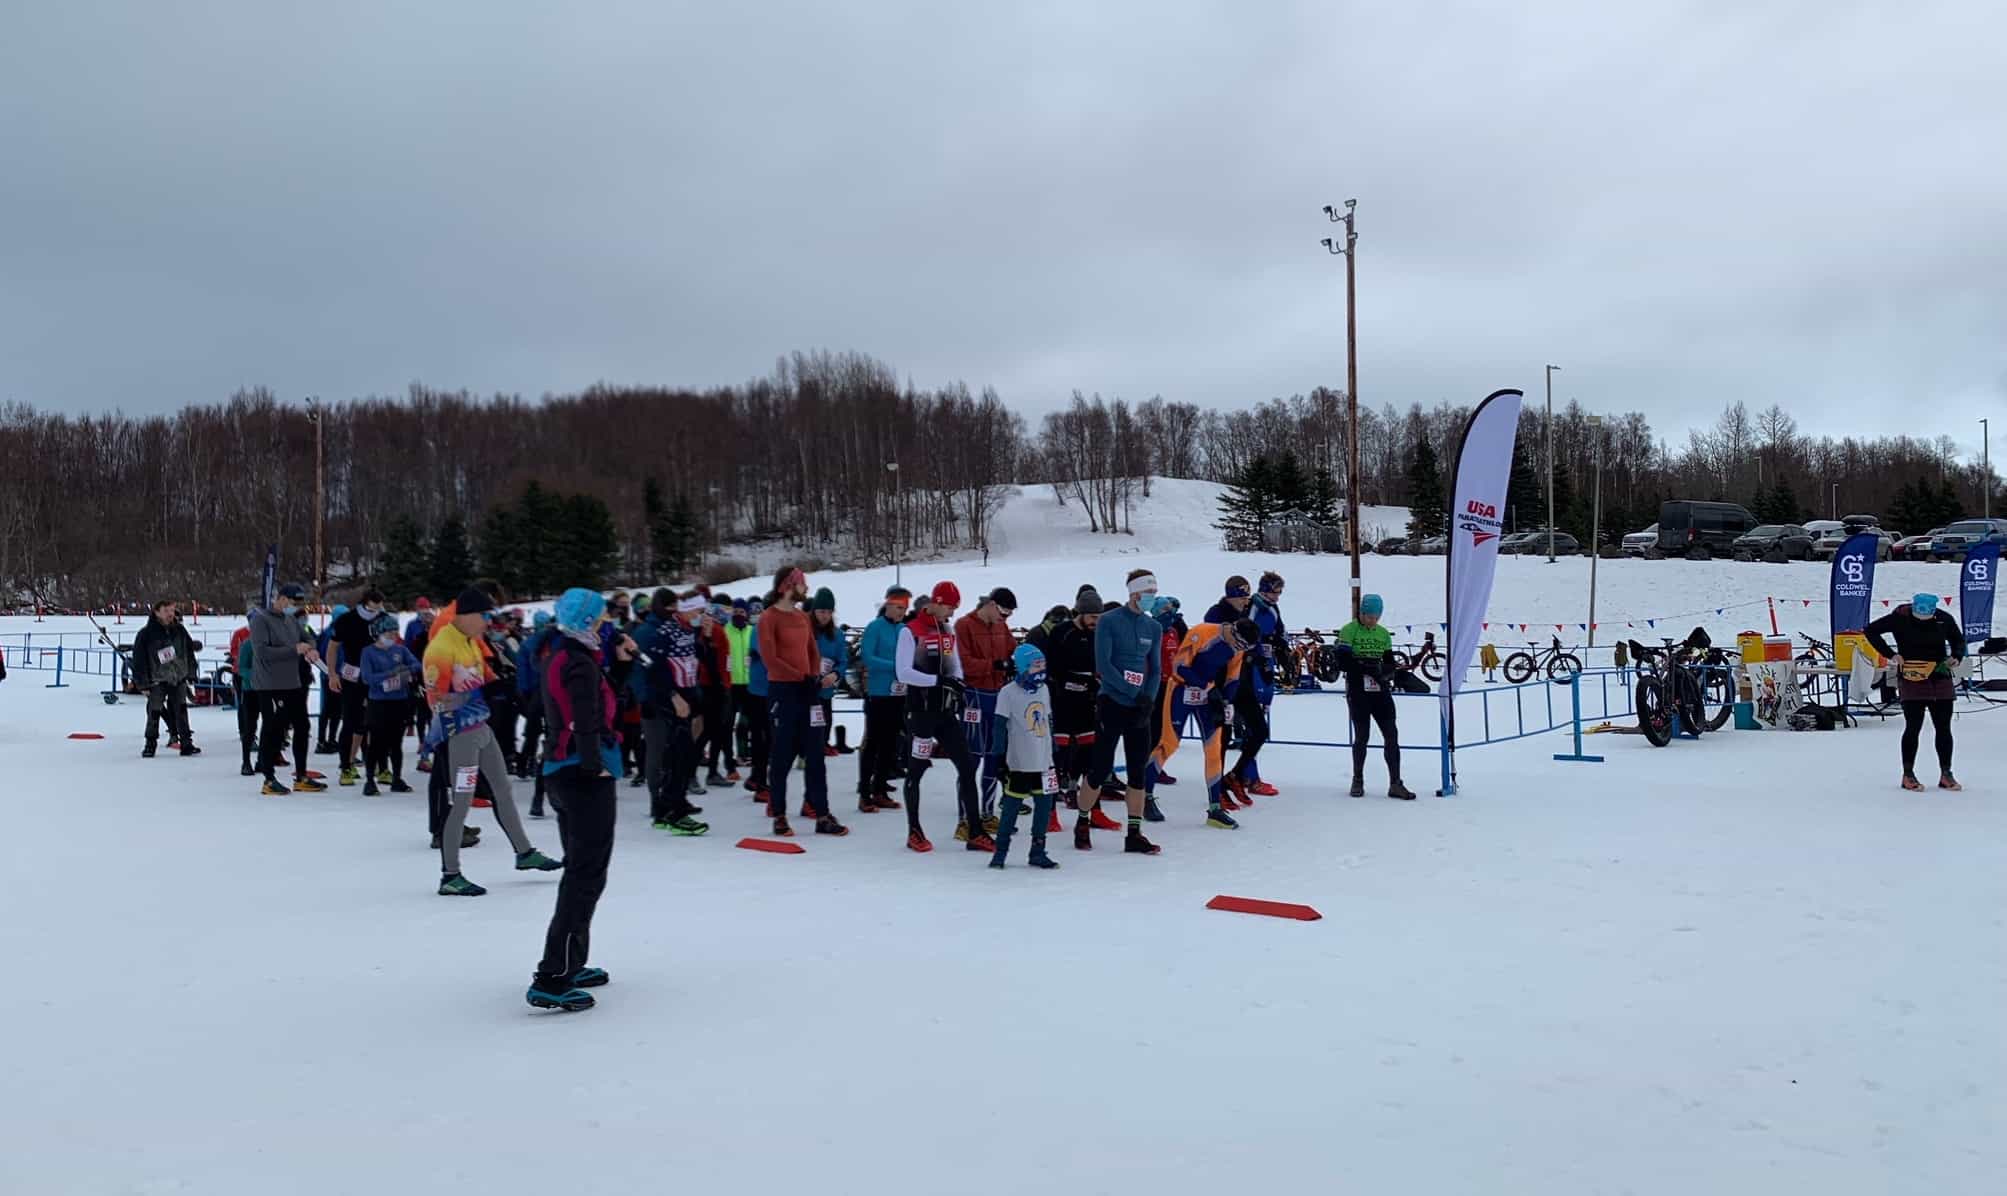 Eric Flanders claims winter triathlon in spring-like conditions - Alaska  Sports Report